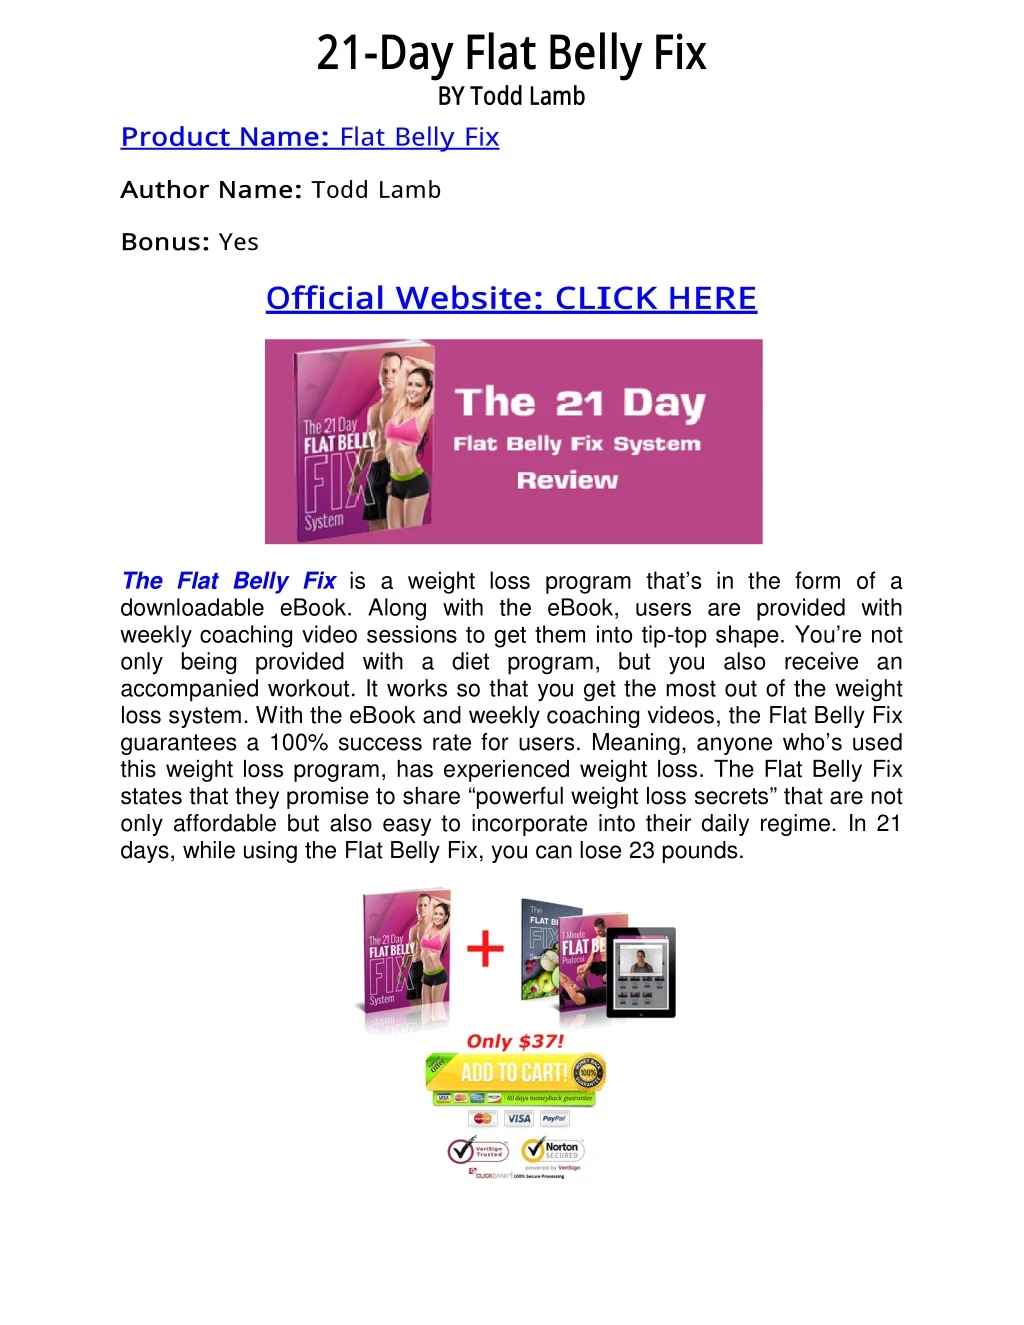 21 day flat belly fix by todd lamb product name